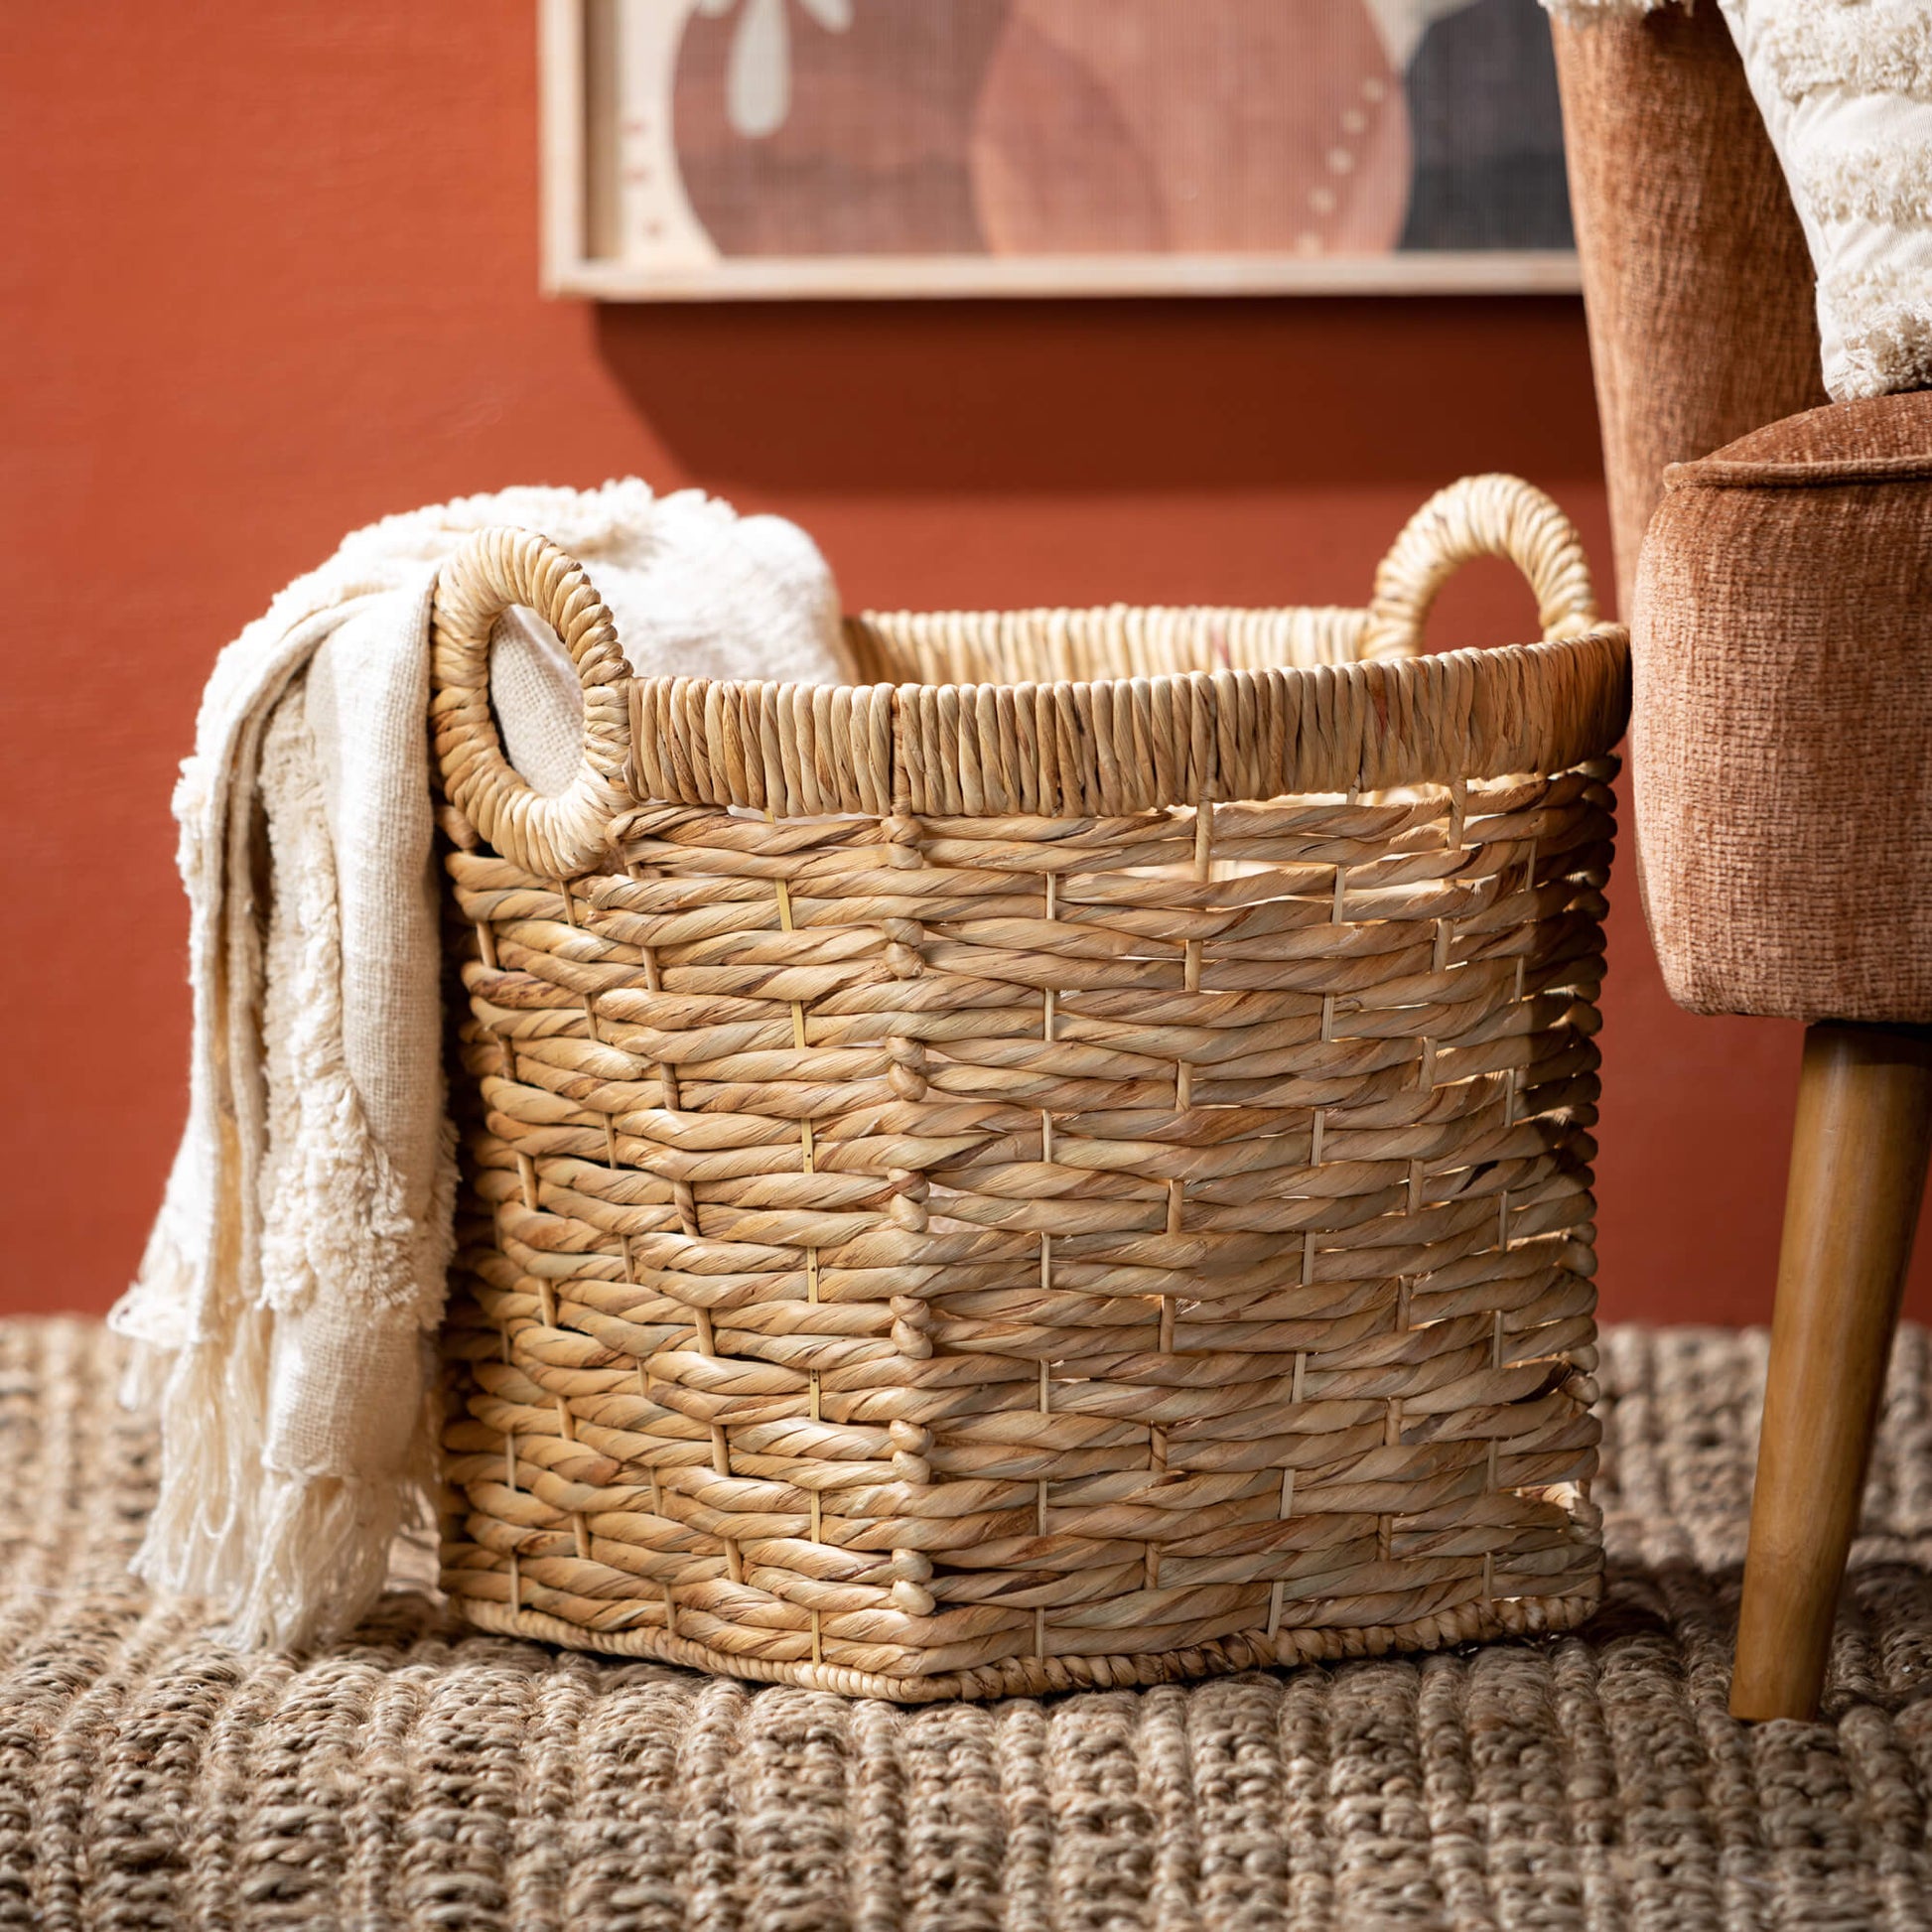 basket on the floor with a blanket draped out of it set next to a chair.